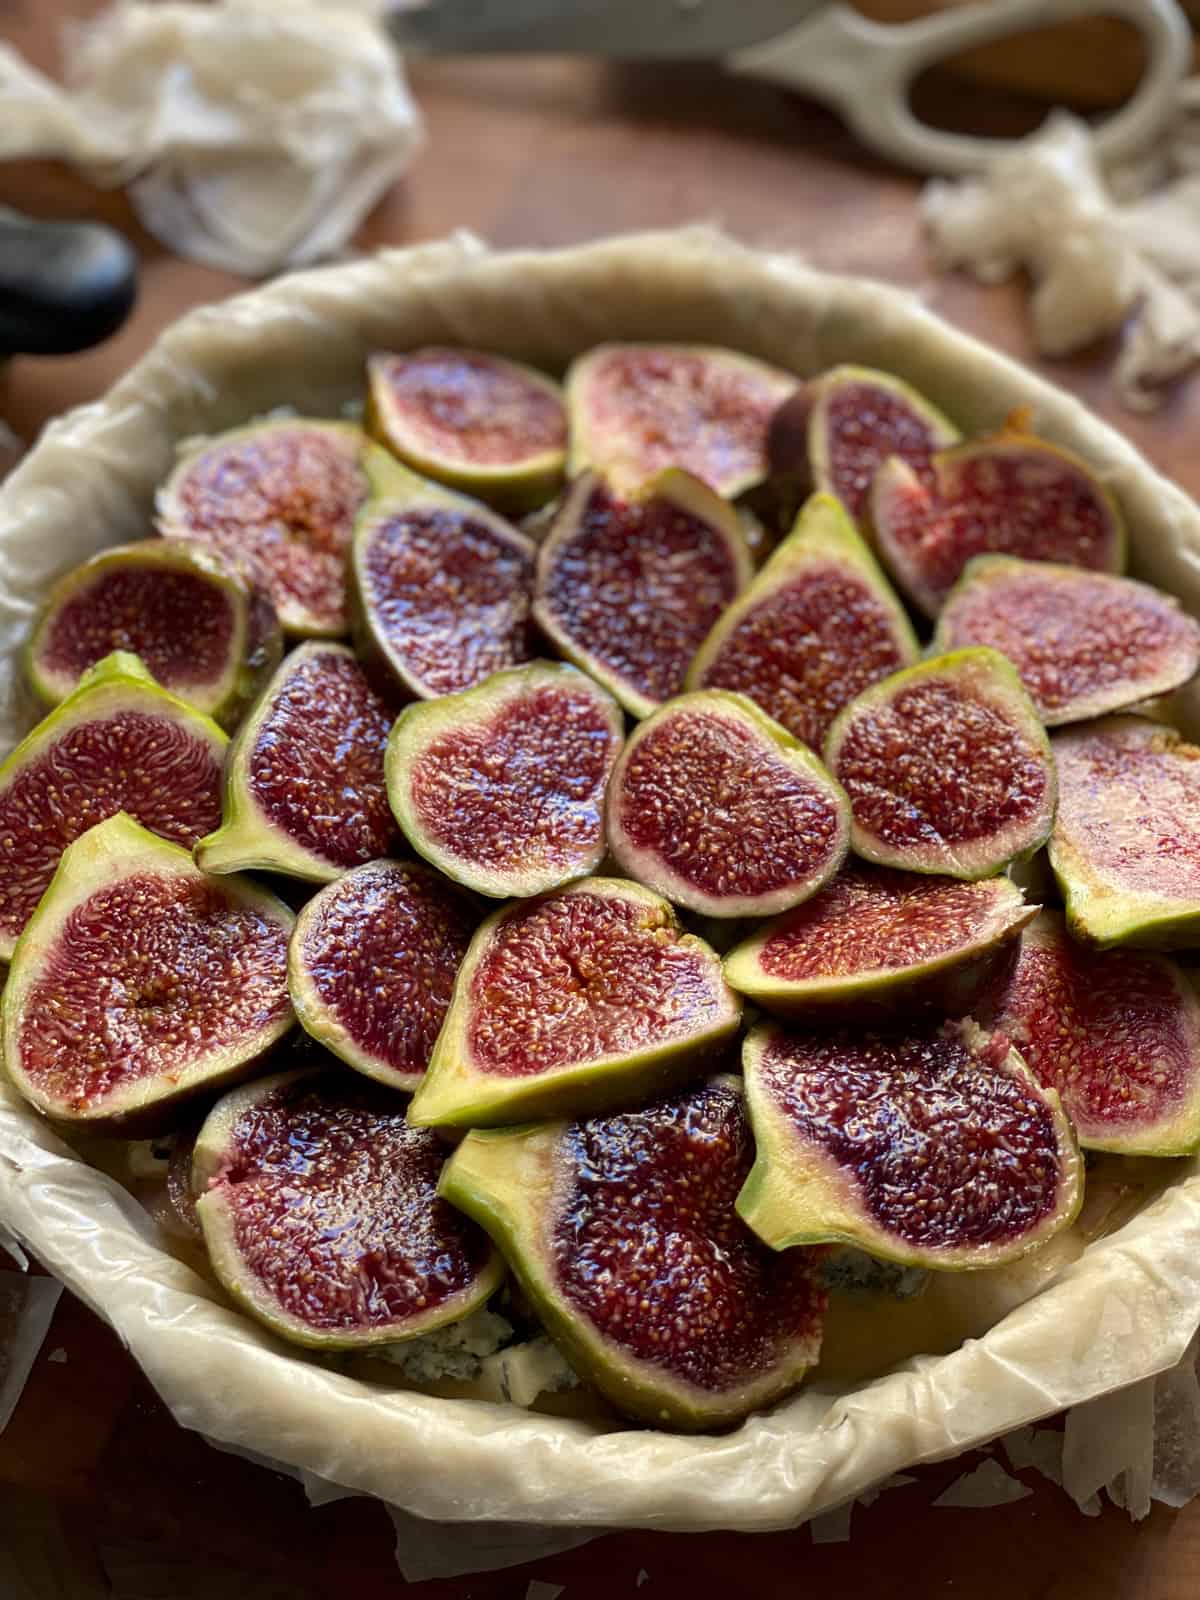 A tart pan layered with phyllo sheets filled with sliced figs.